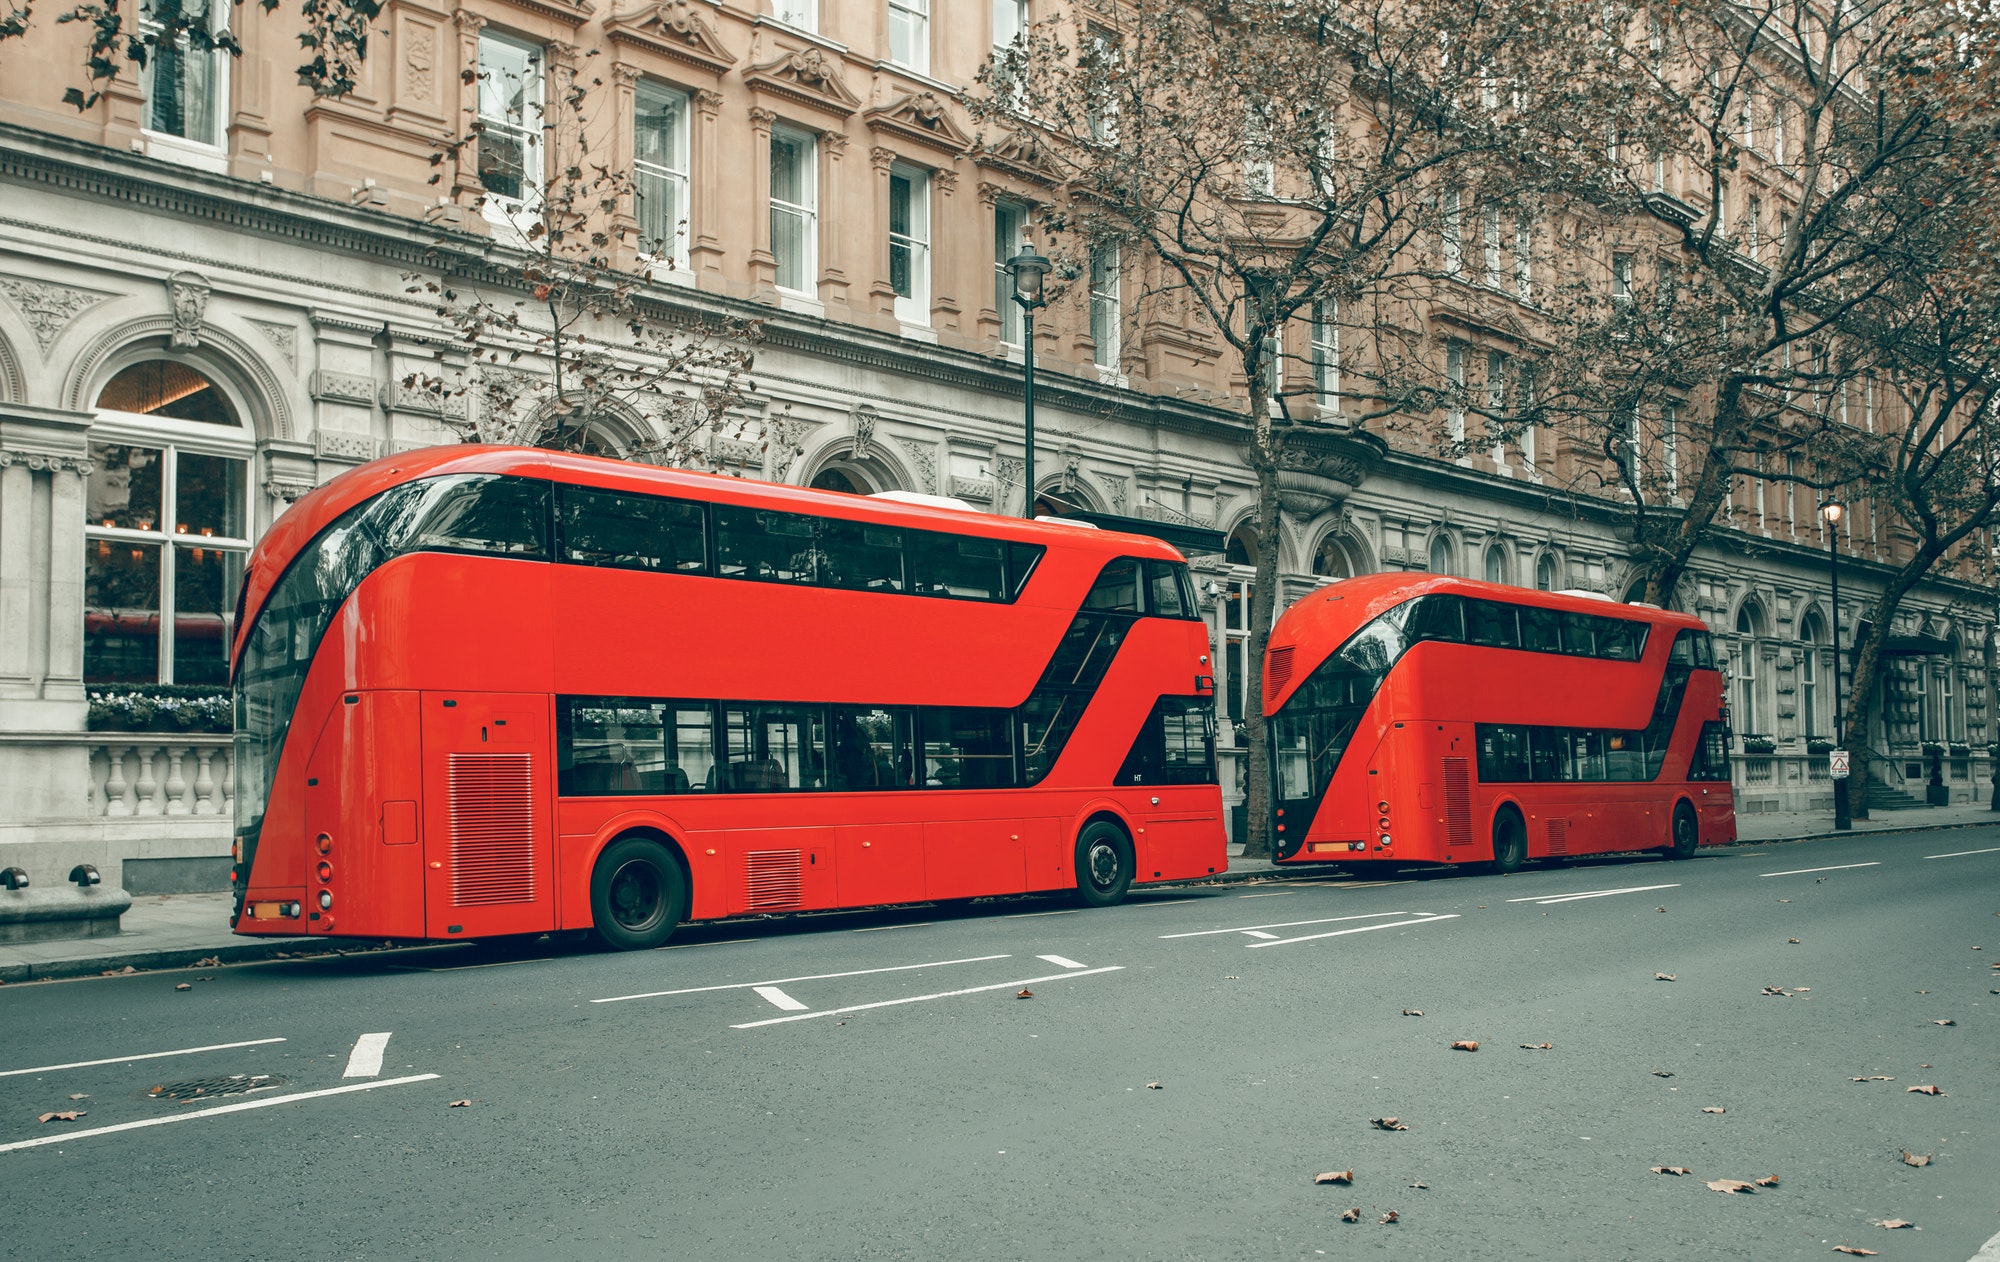 London's red buses in station. Bus of the public transport